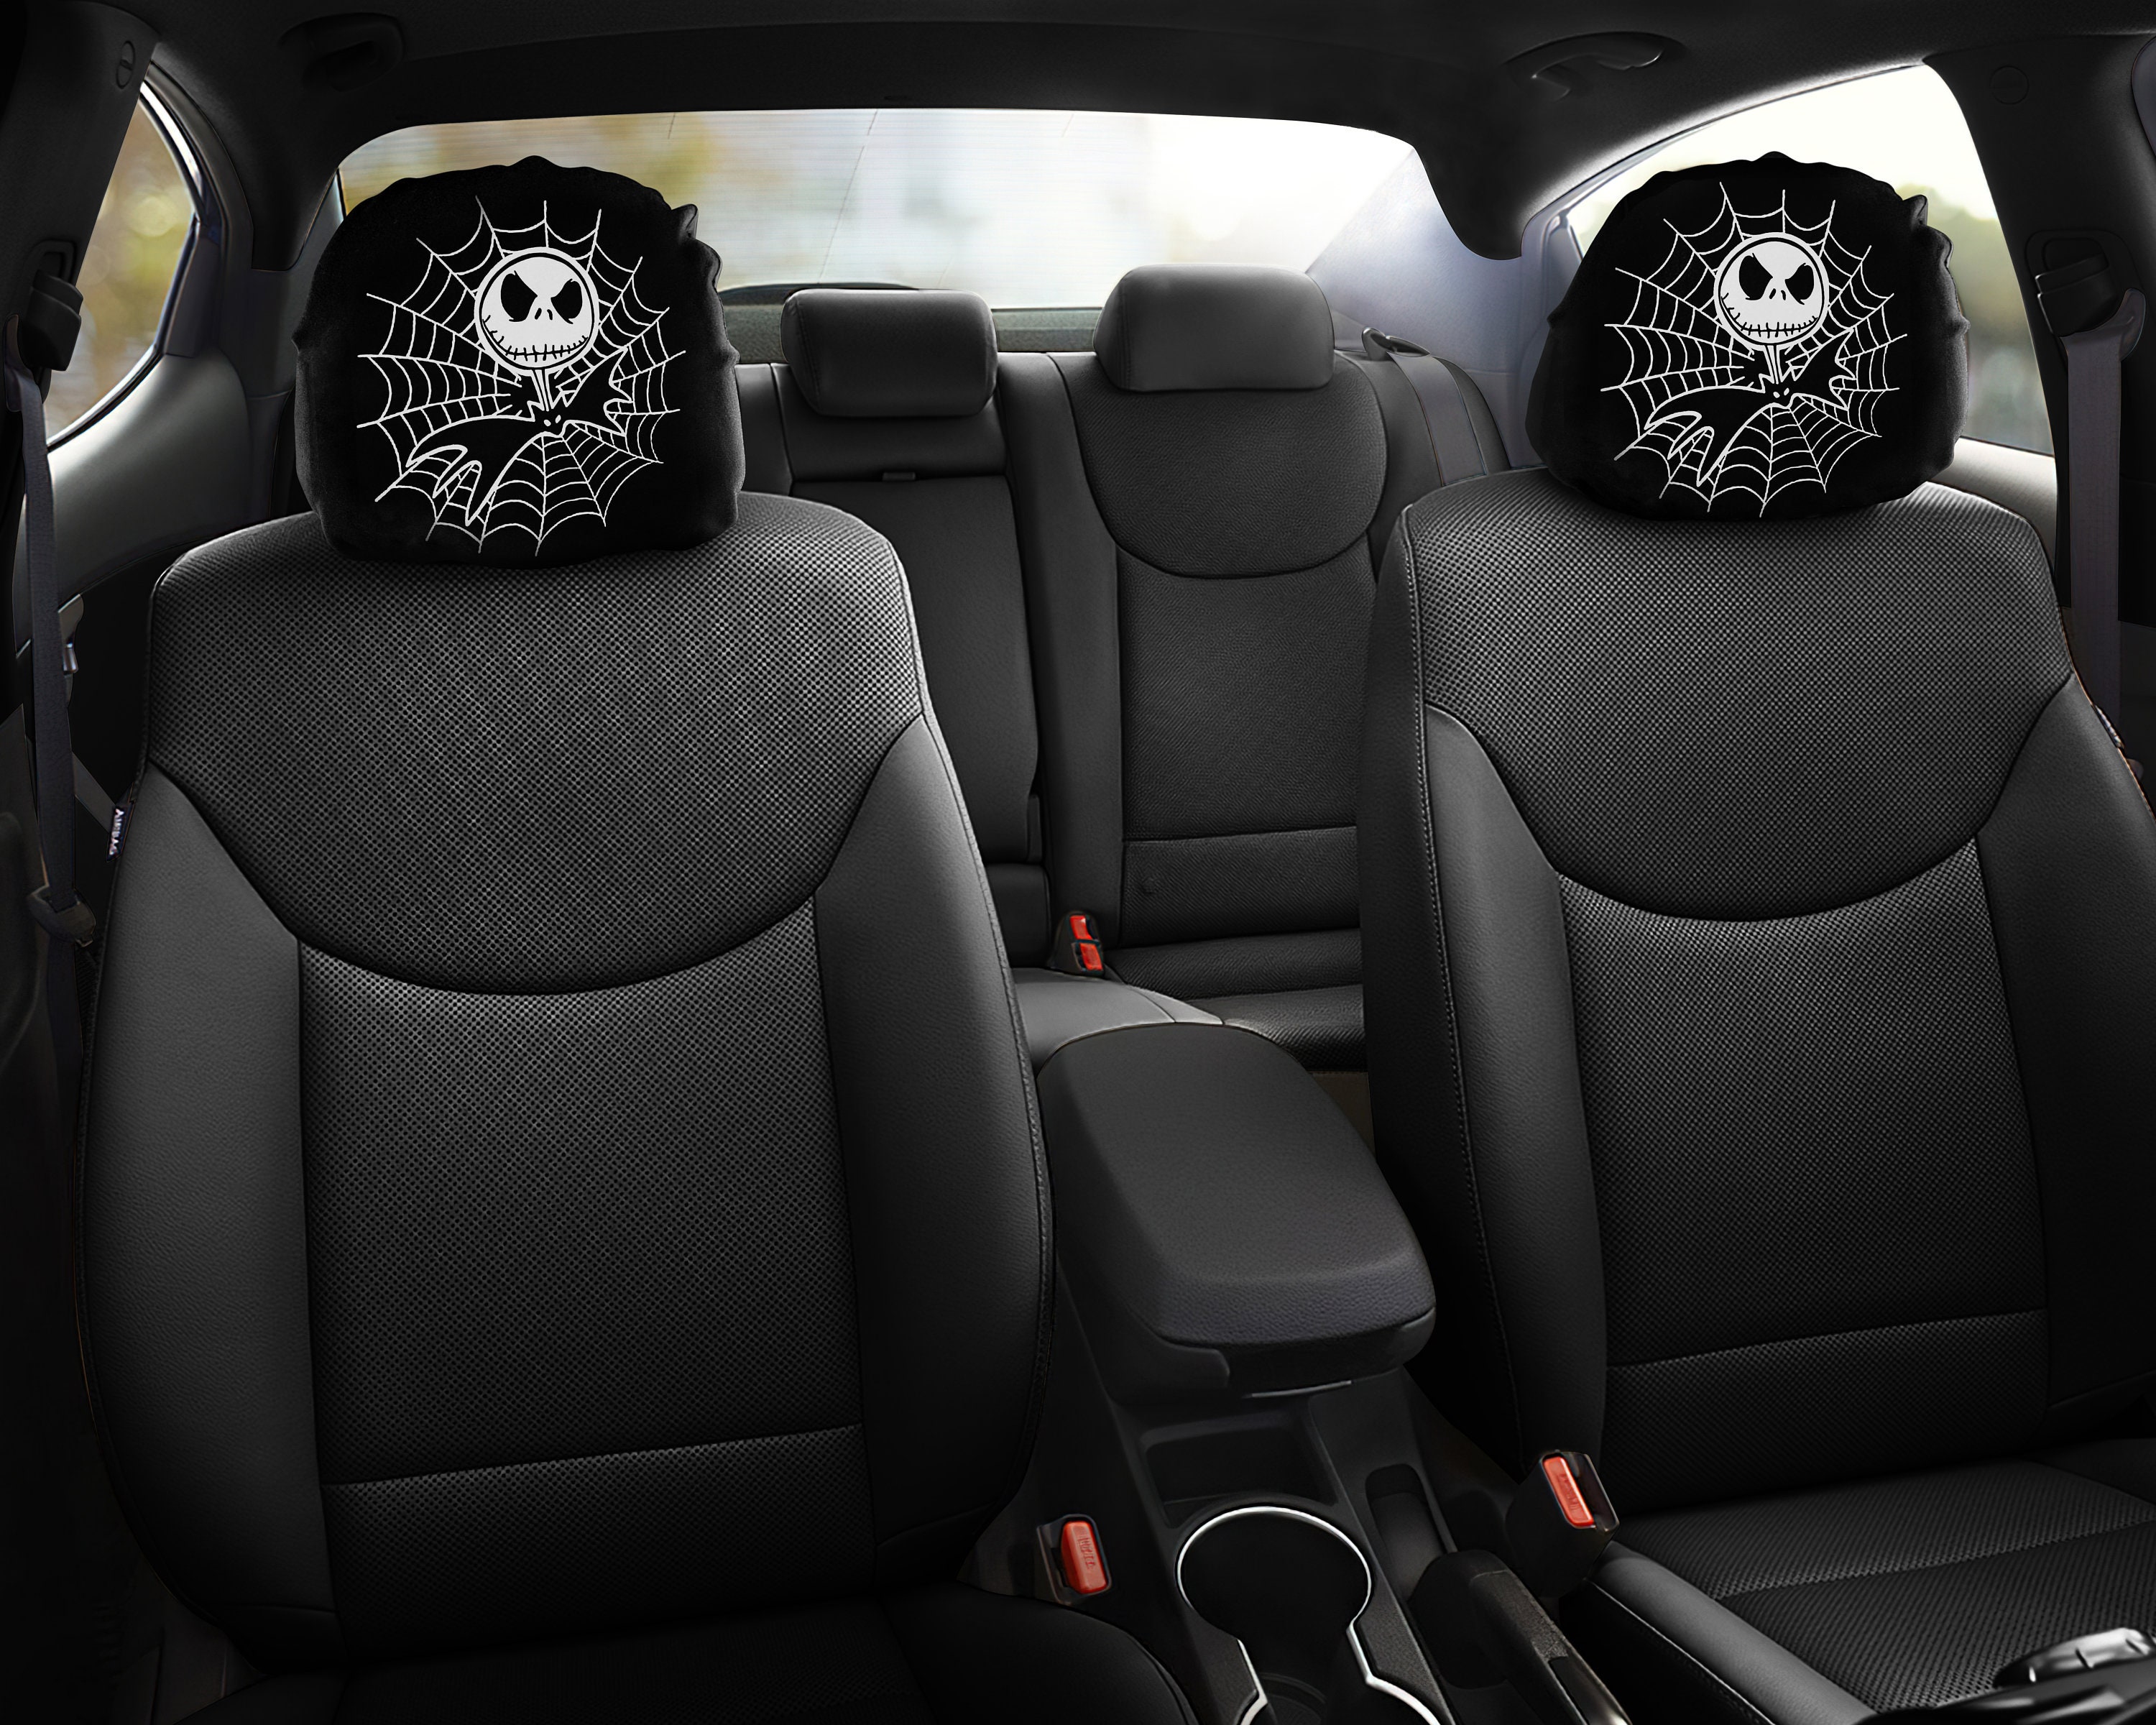 Father's Day Gift, Car Decor Headrest Covers, Jack Skellington Spider Web - Halloween Decor For Car, Holiday Gift, Jack Skellington Print